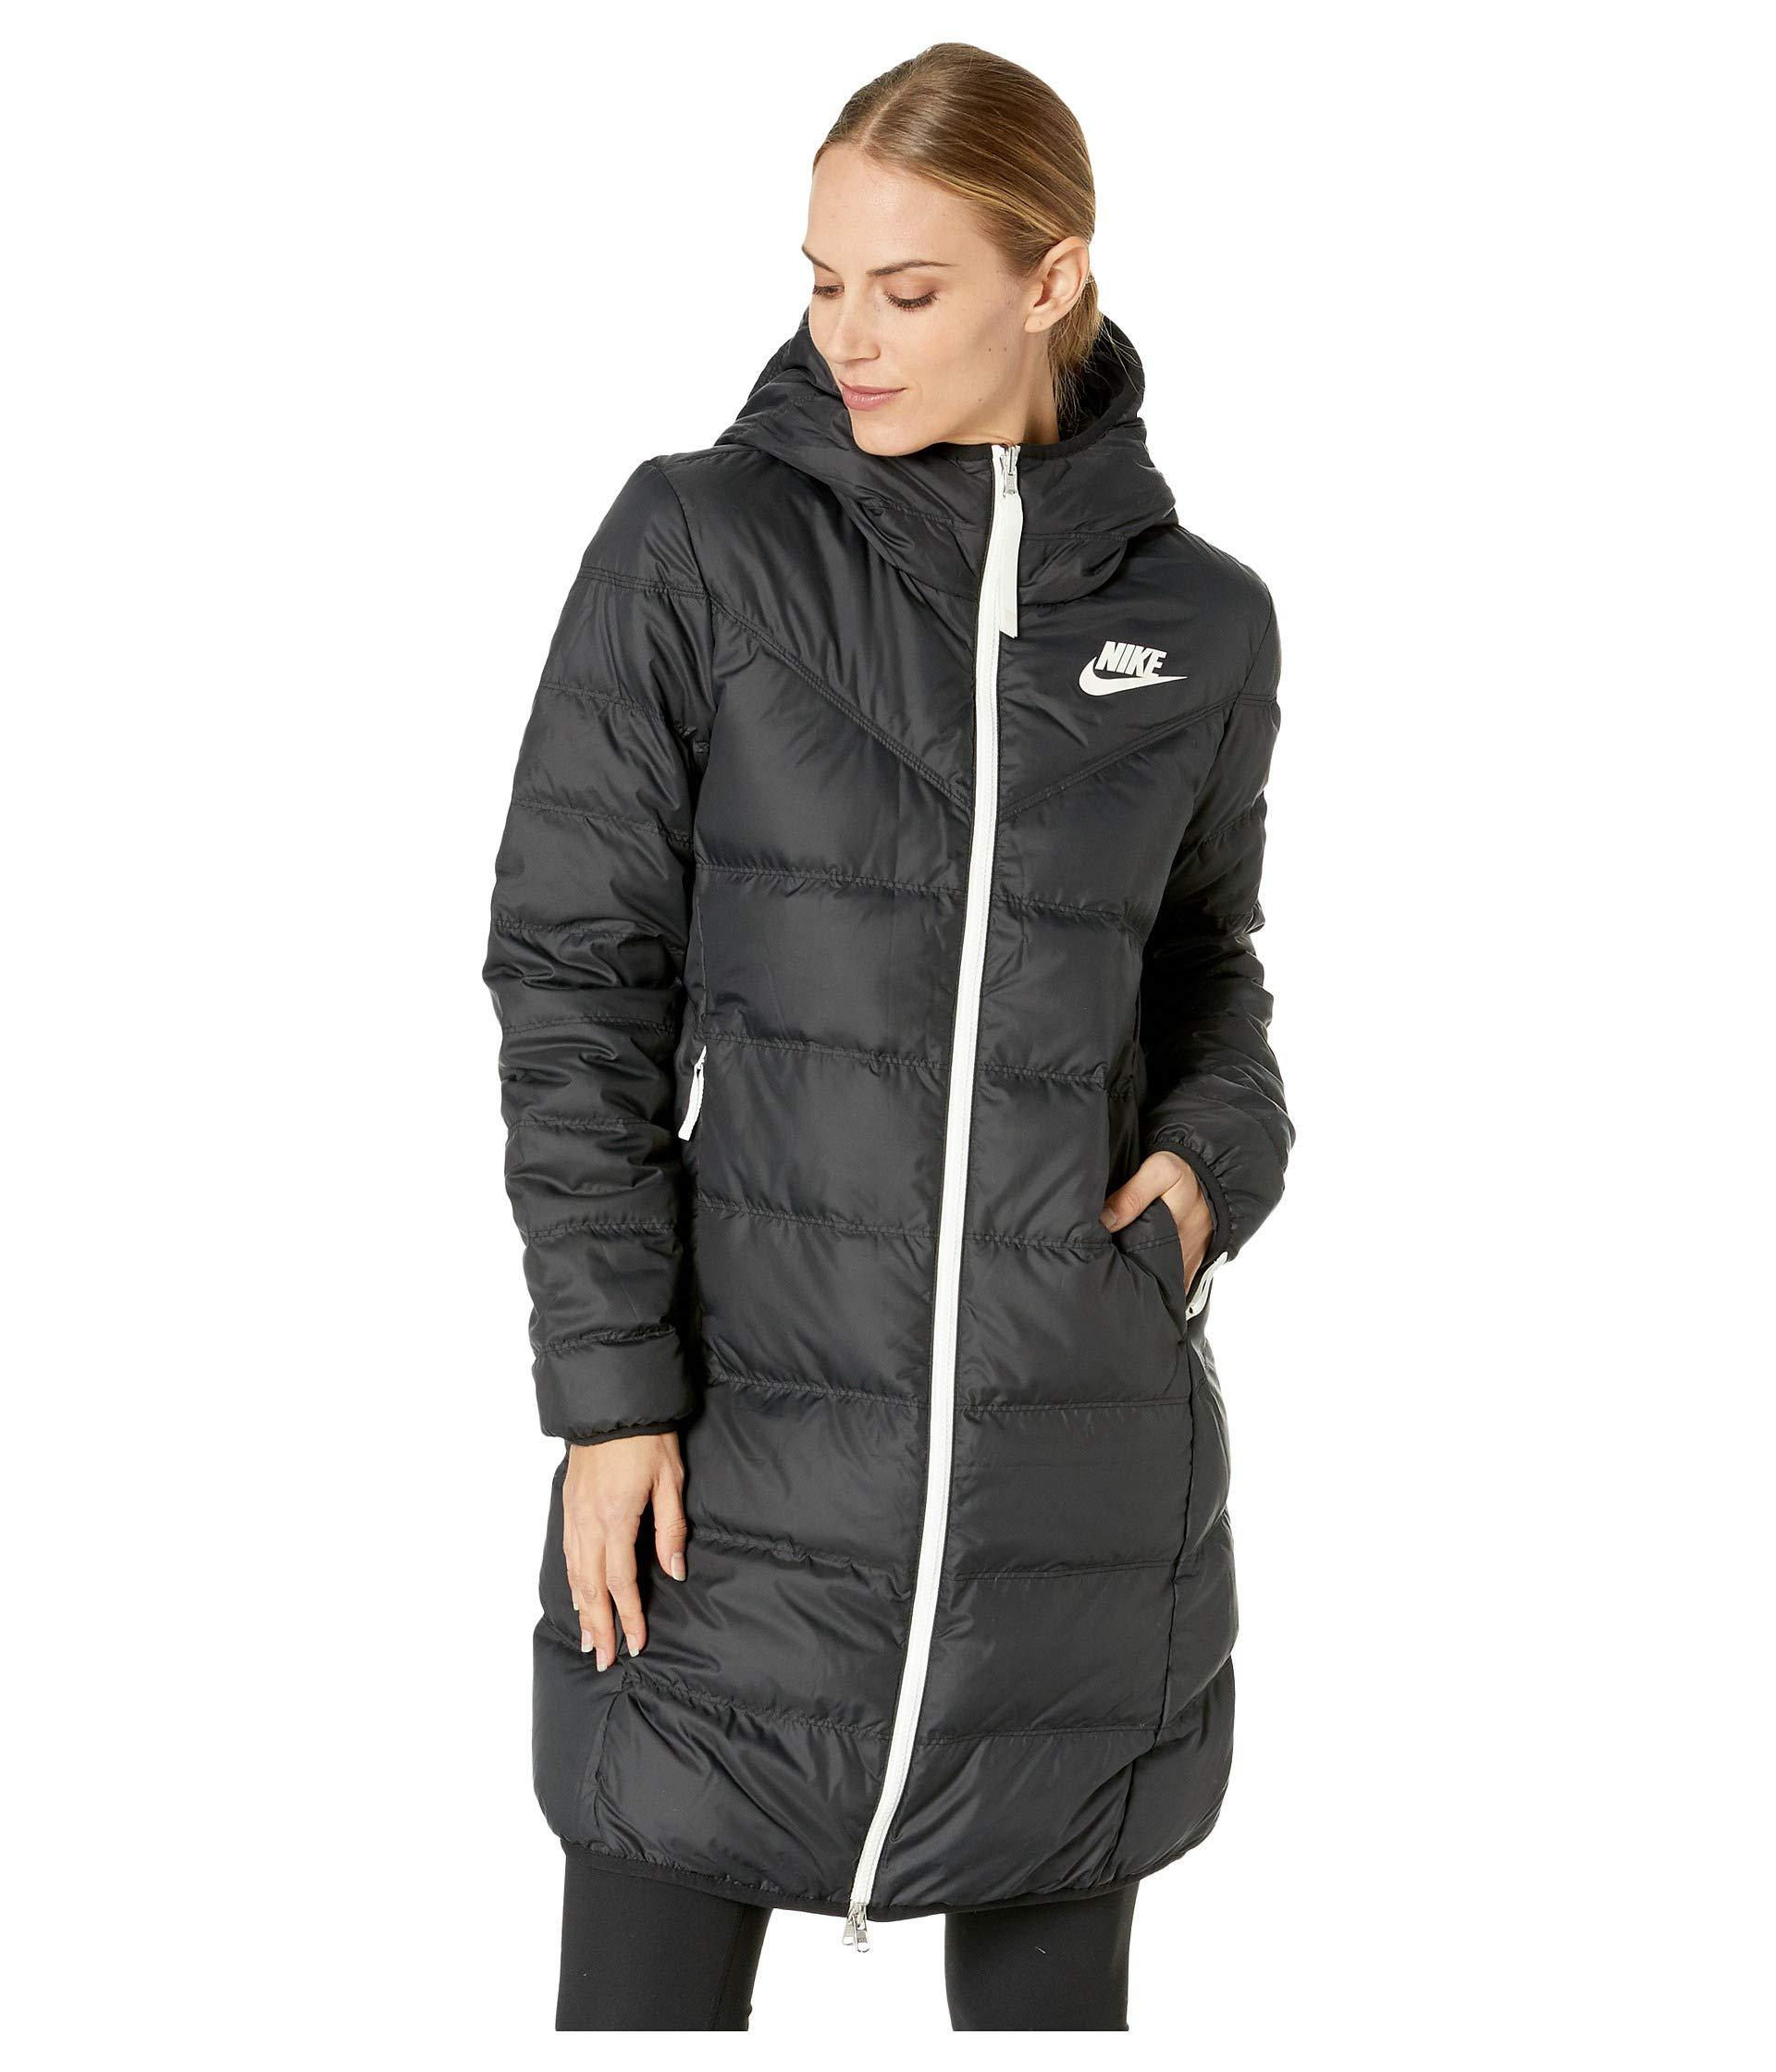 Nike sportswear windrunner down fill womens online, North face outlet near me now, white t shirt yellow collar. 